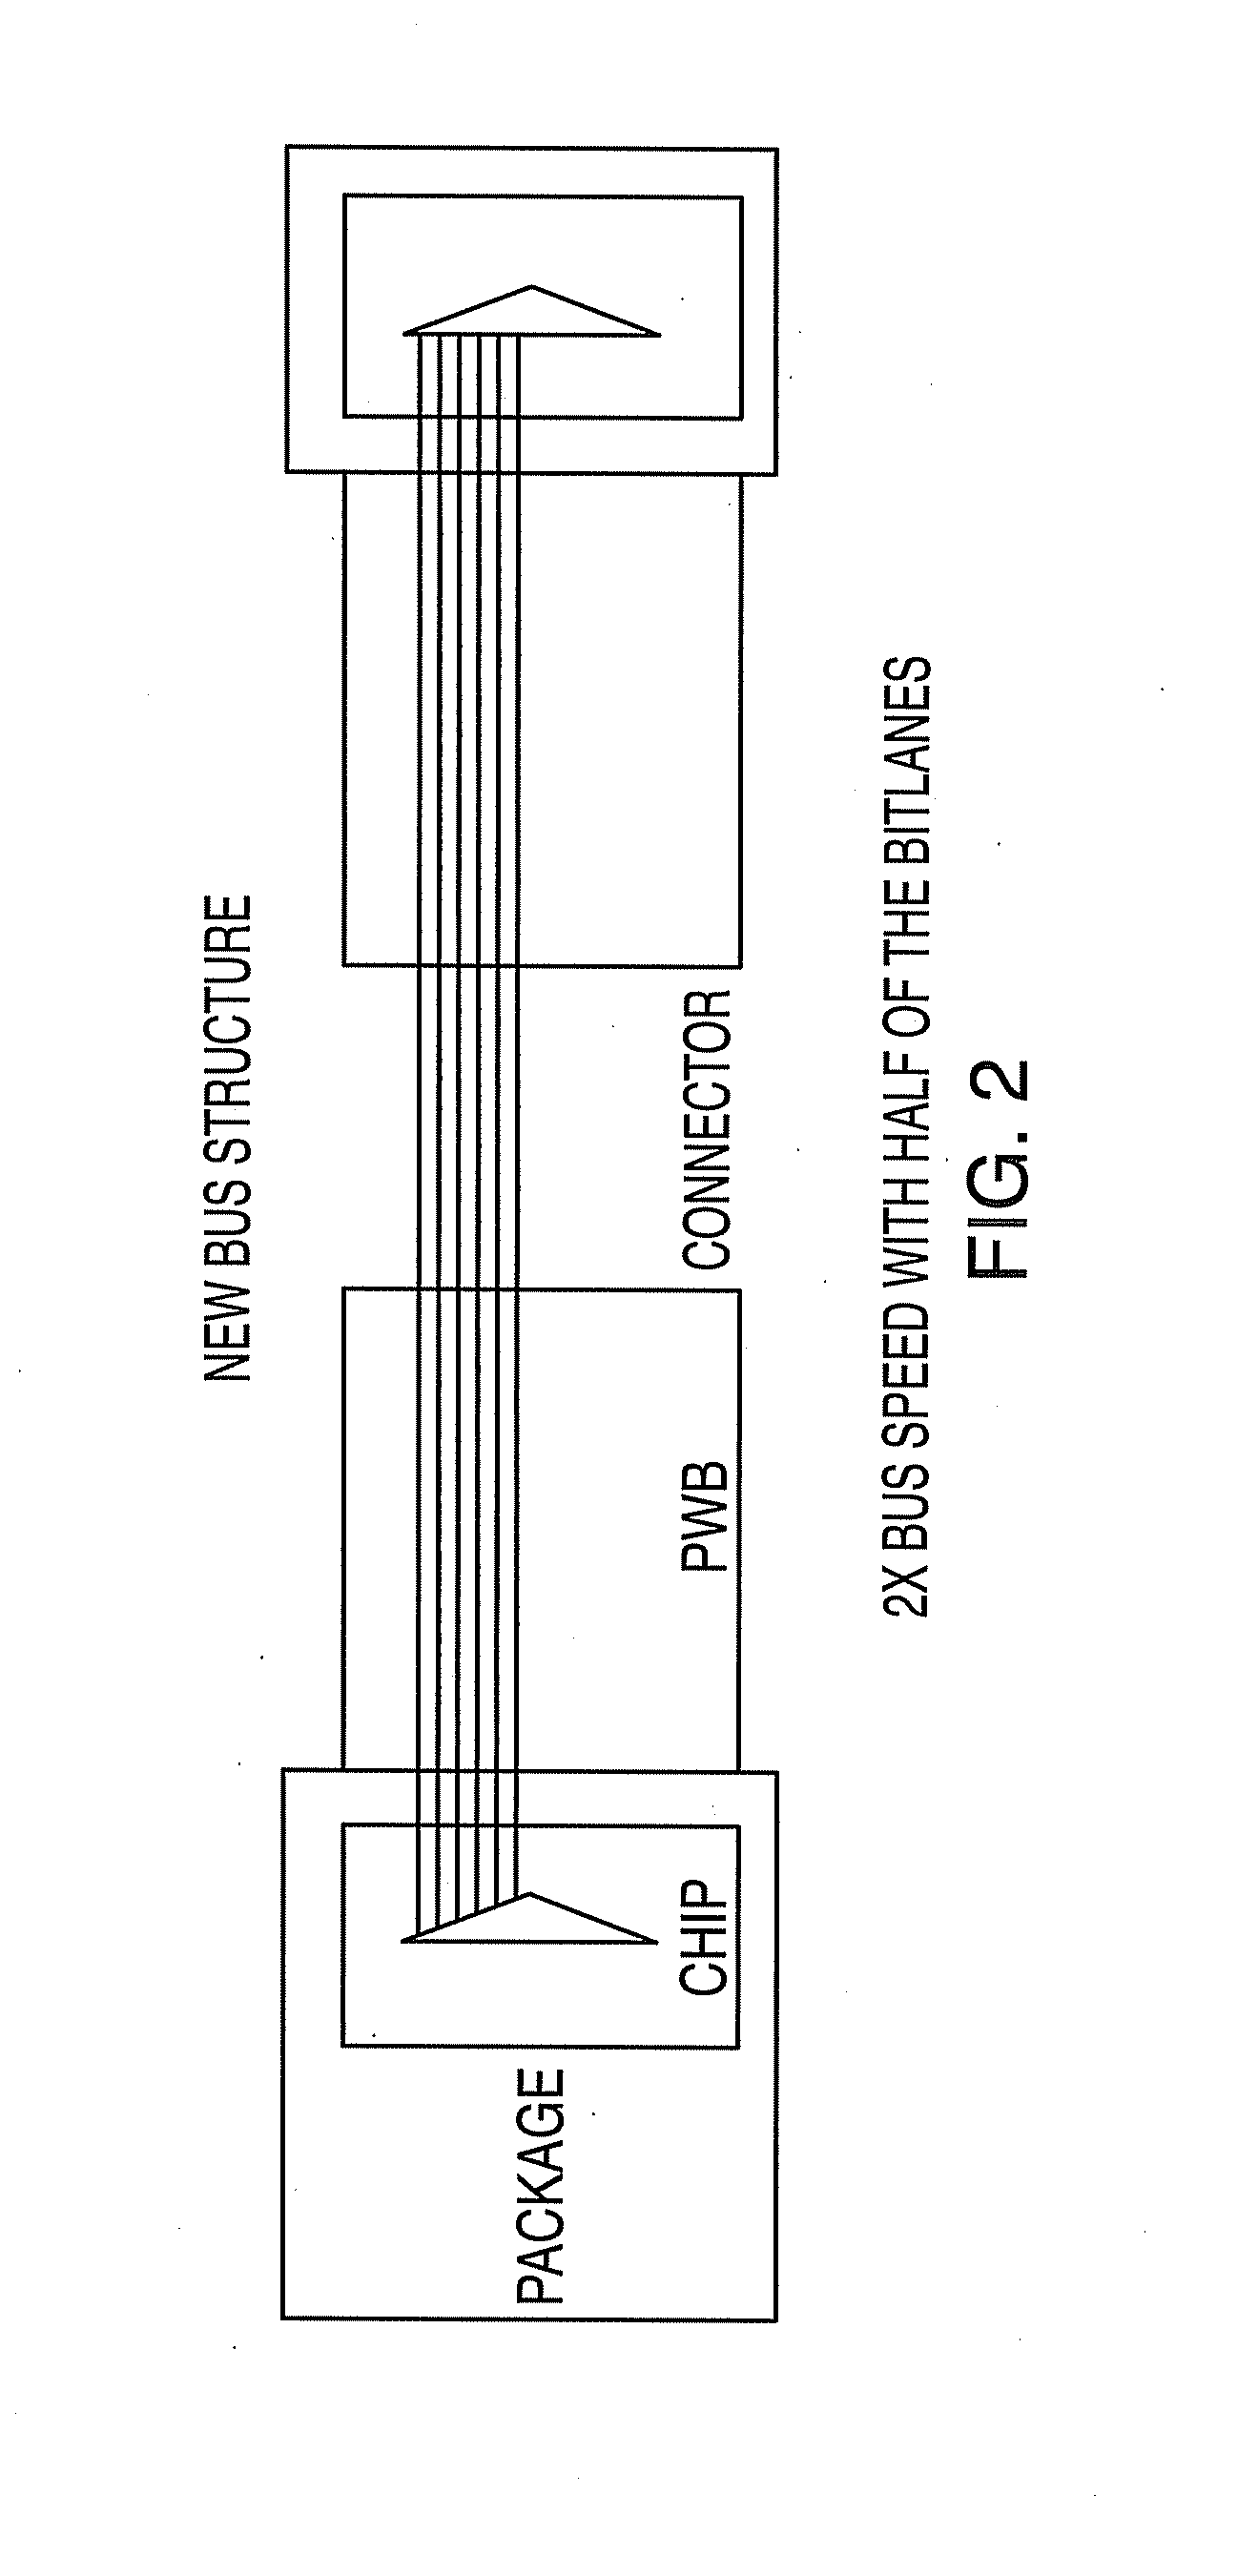 Systems, methods, and computer program products for providing a two-bit symbol bus error correcting code with bus timing improvements